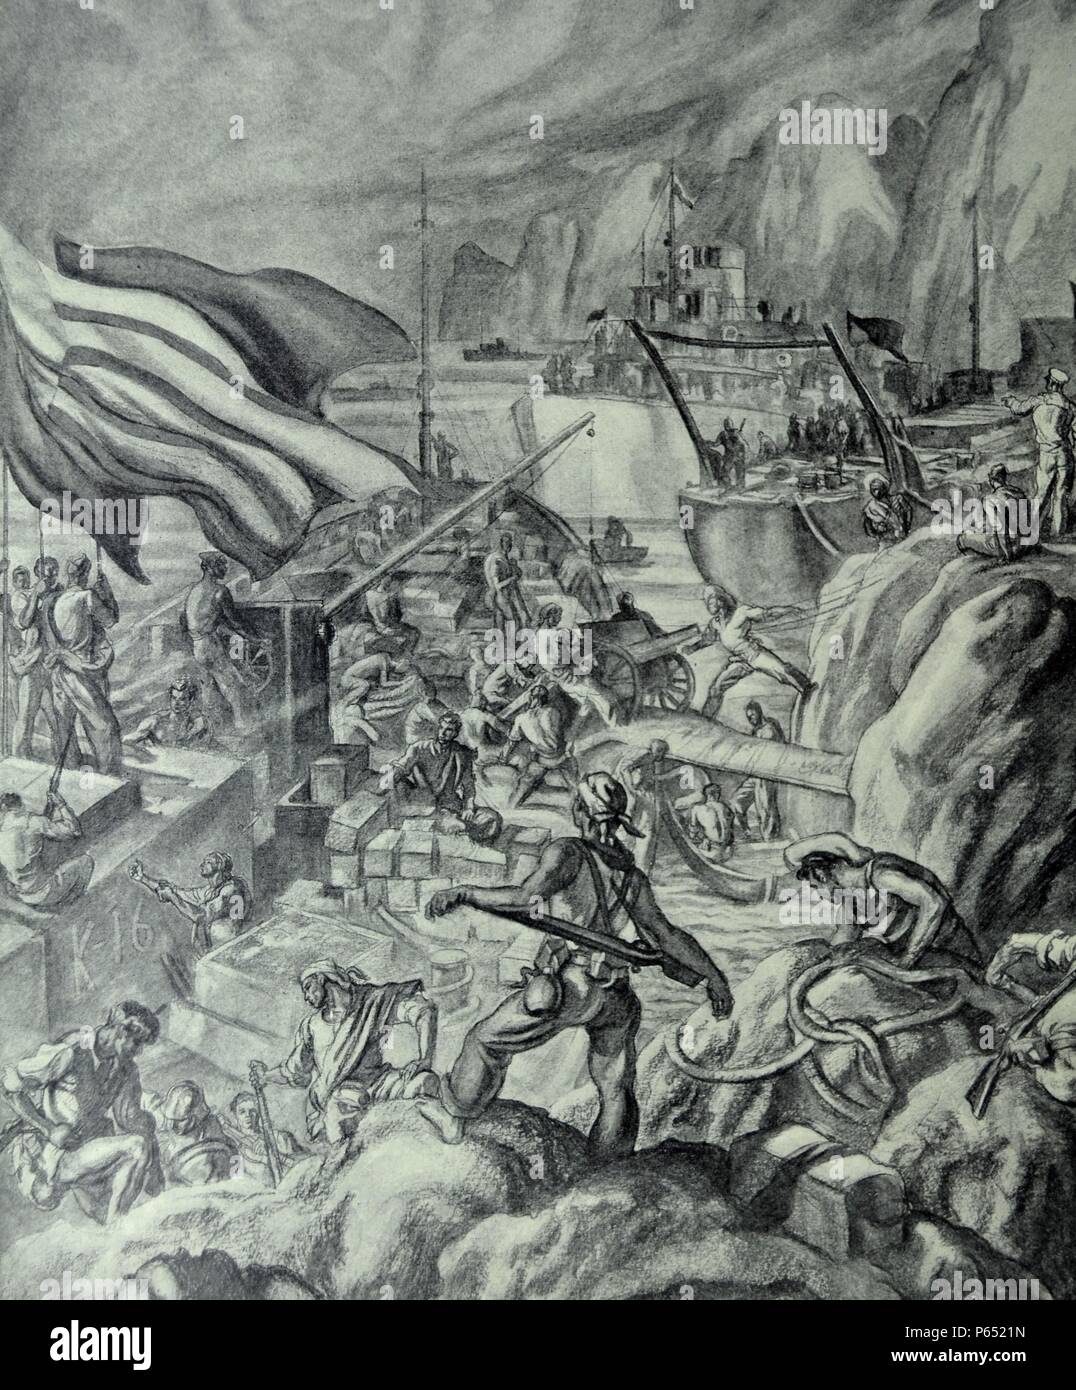 Spanish Civil War: Catalan republican forces take supplies from ships in a rocky inlet on the coast. Supplies including weapons are offloaded. drawing by C. Saenz de Tejada Stock Photo